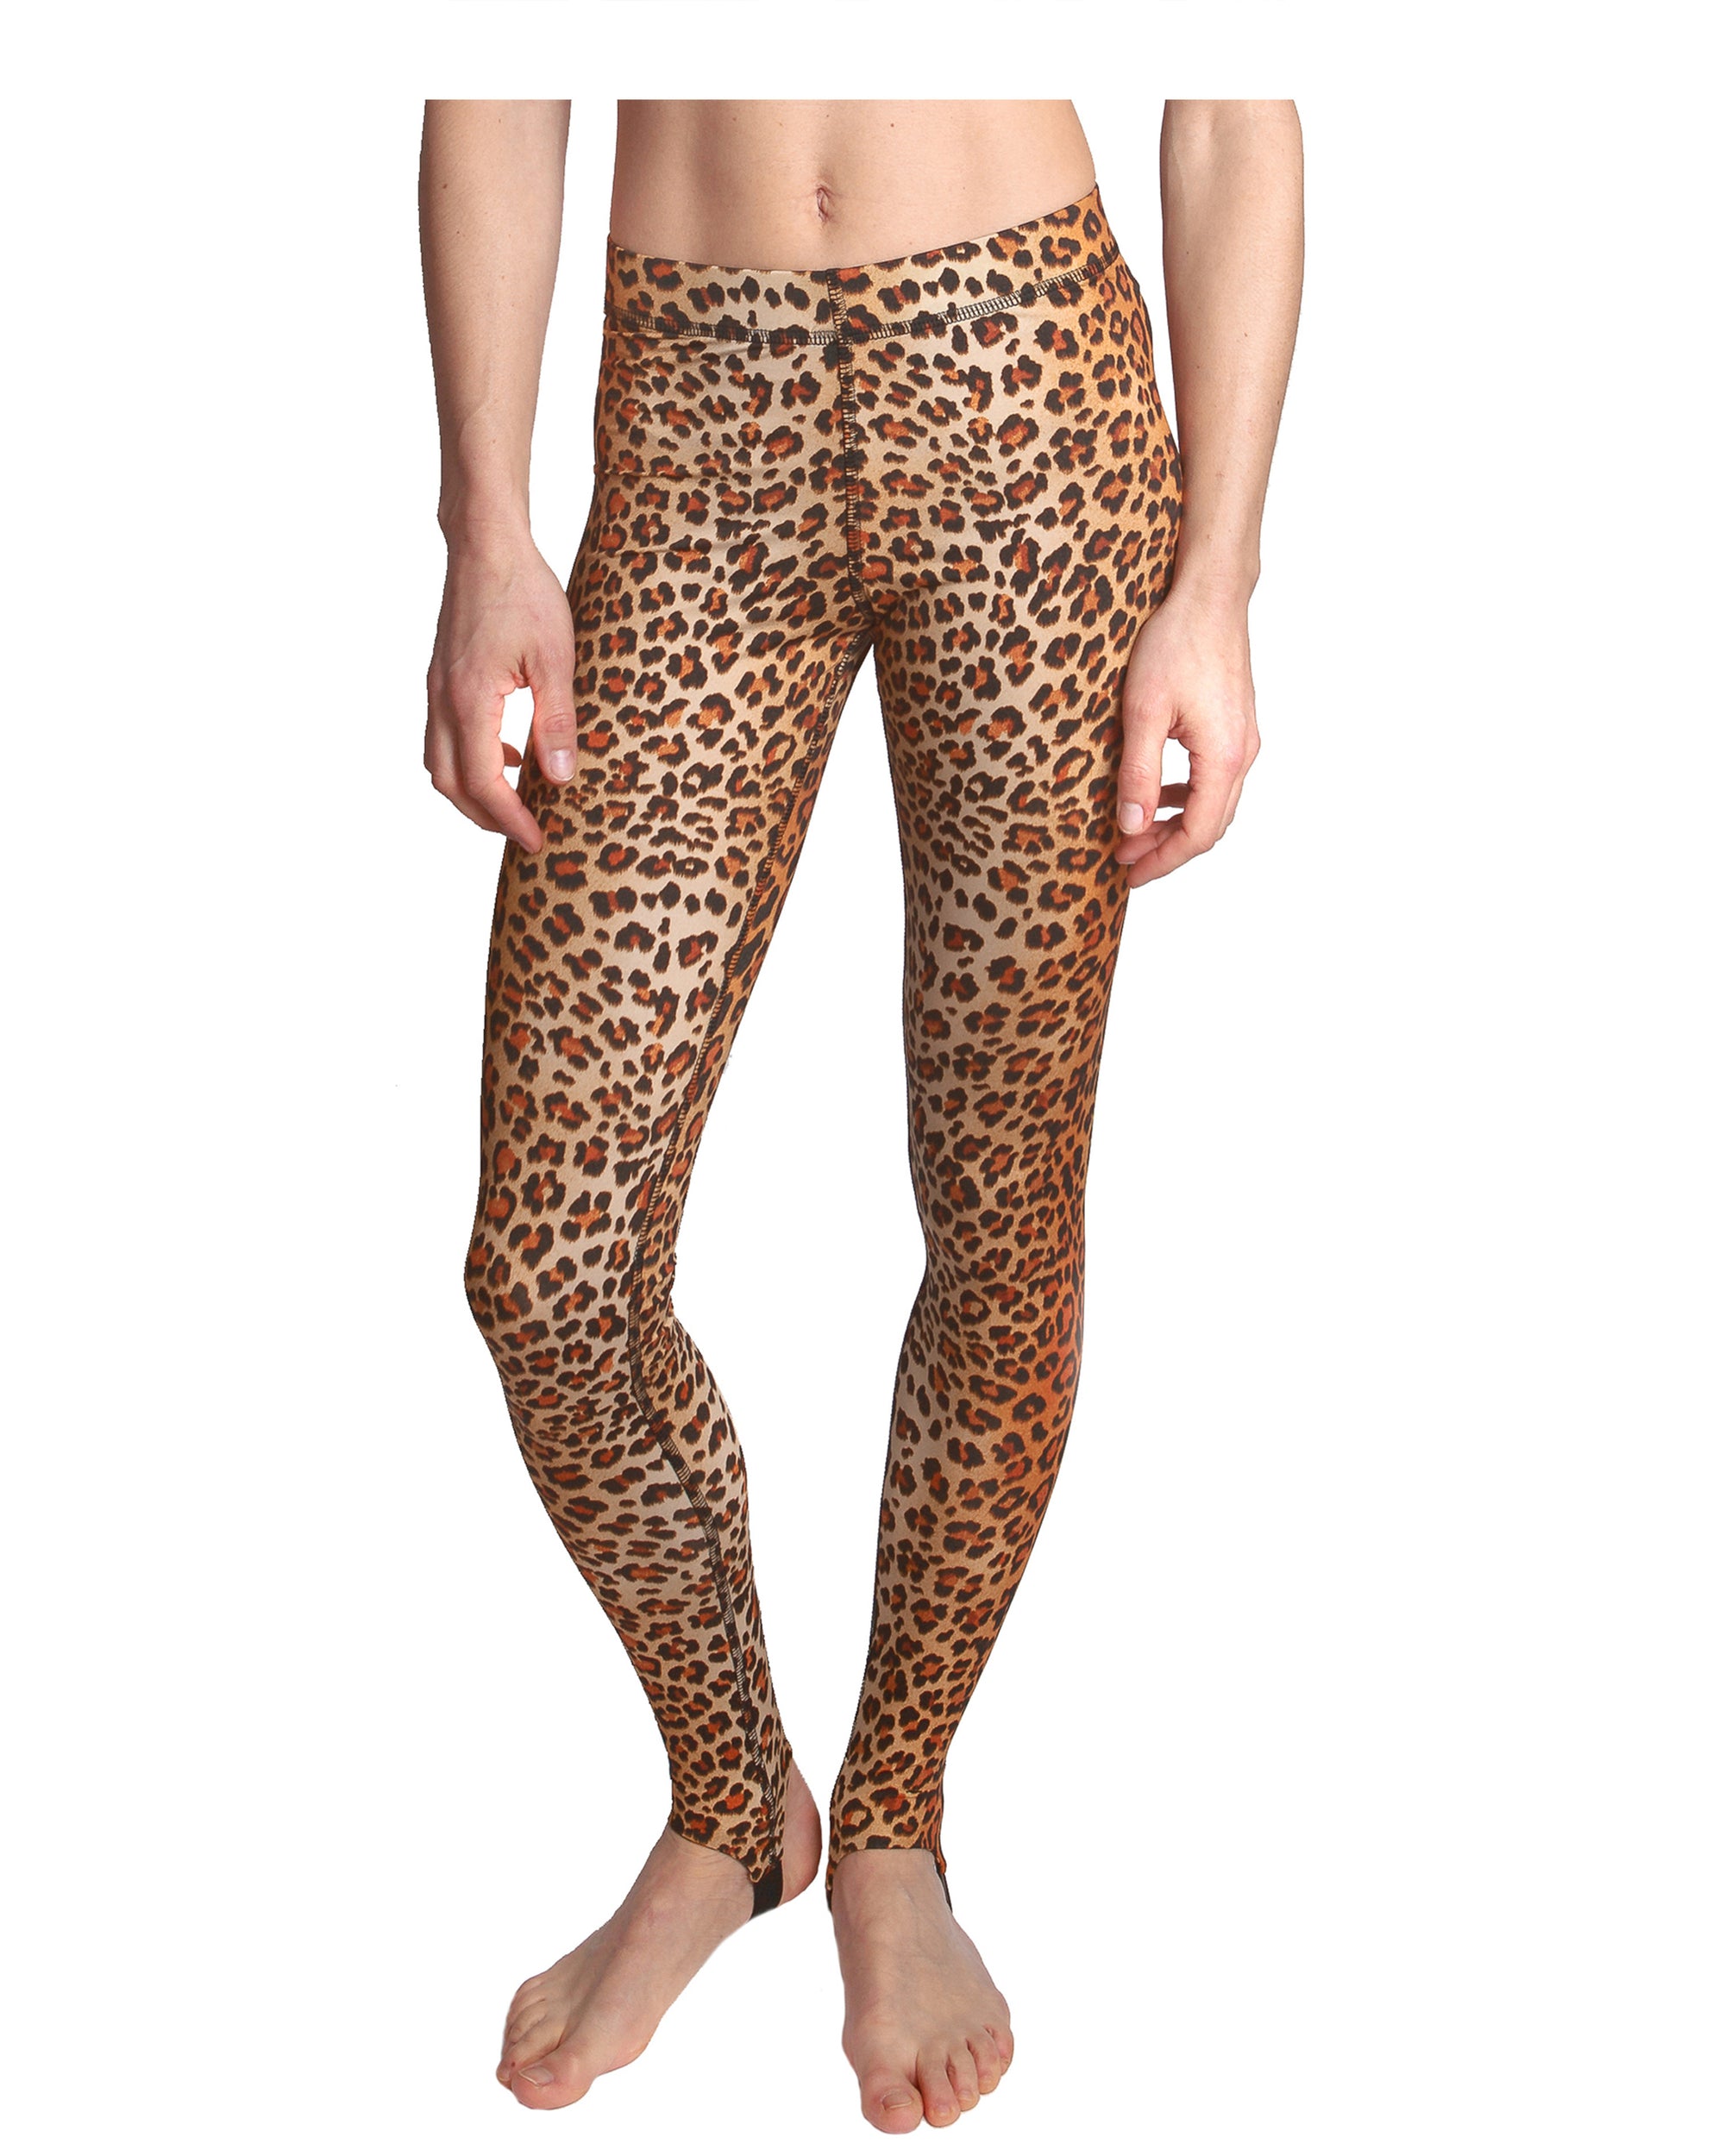 Prestatie Simuleren congestie Leopard print gym leggings - Printed tights for workouts like yoga,  running, cycling or swimming - Premium quality Italian fabric - By LPRD